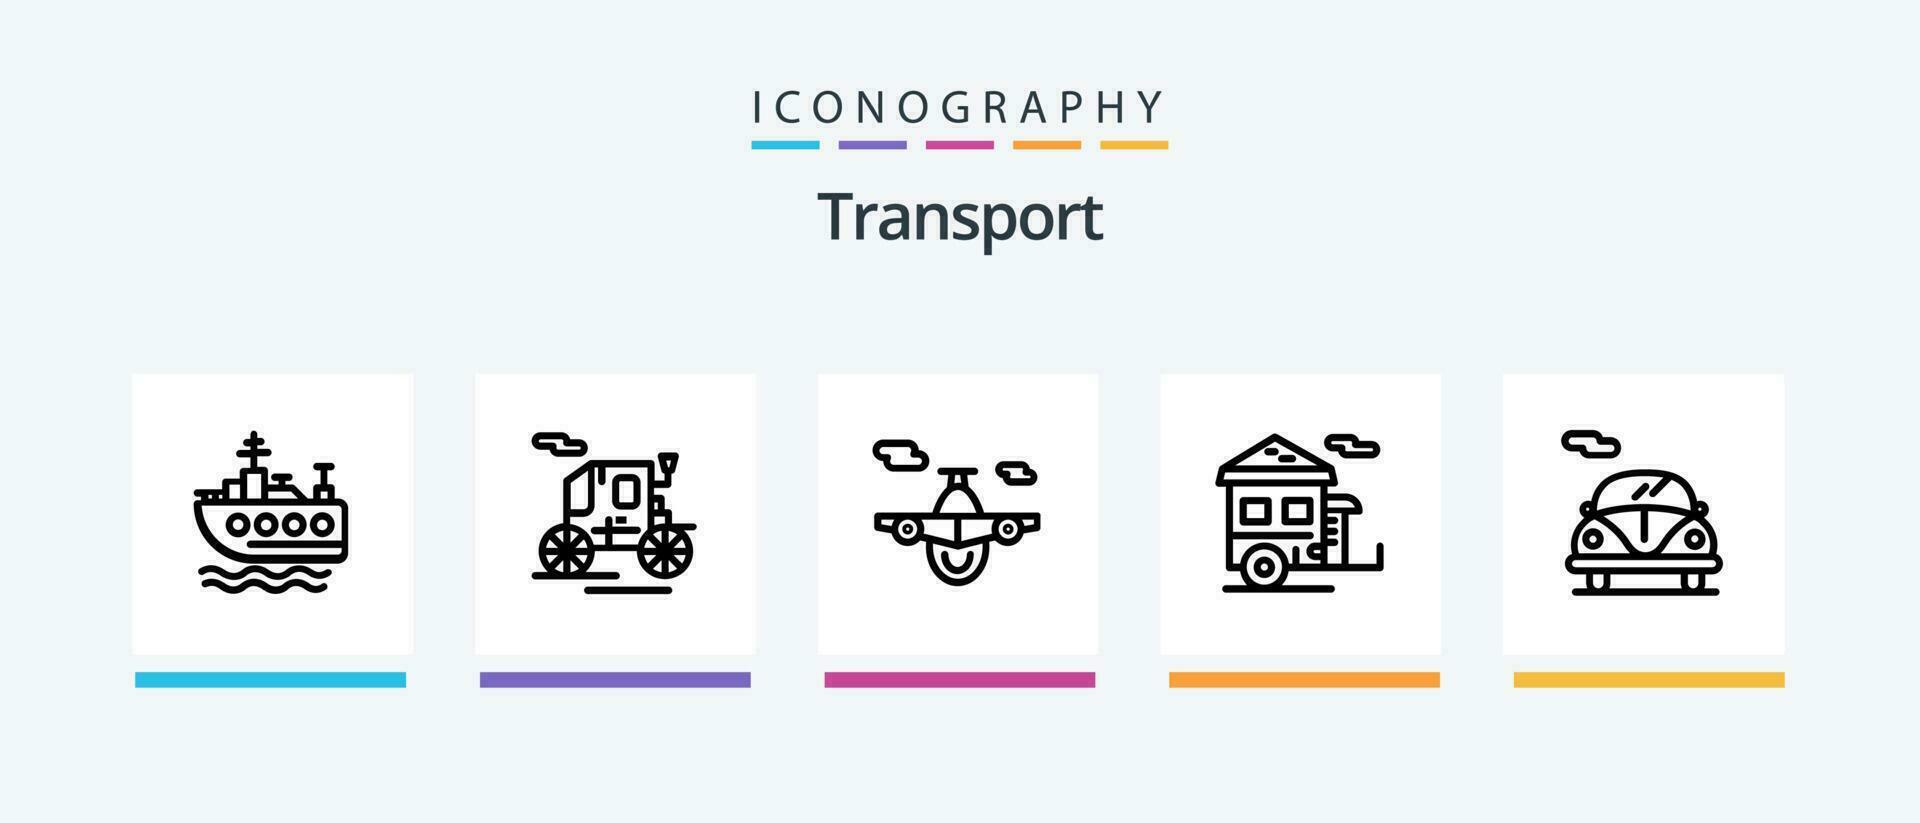 Transport Line 5 Icon Pack Including . transport. helicopter. bus. car. Creative Icons Design vector